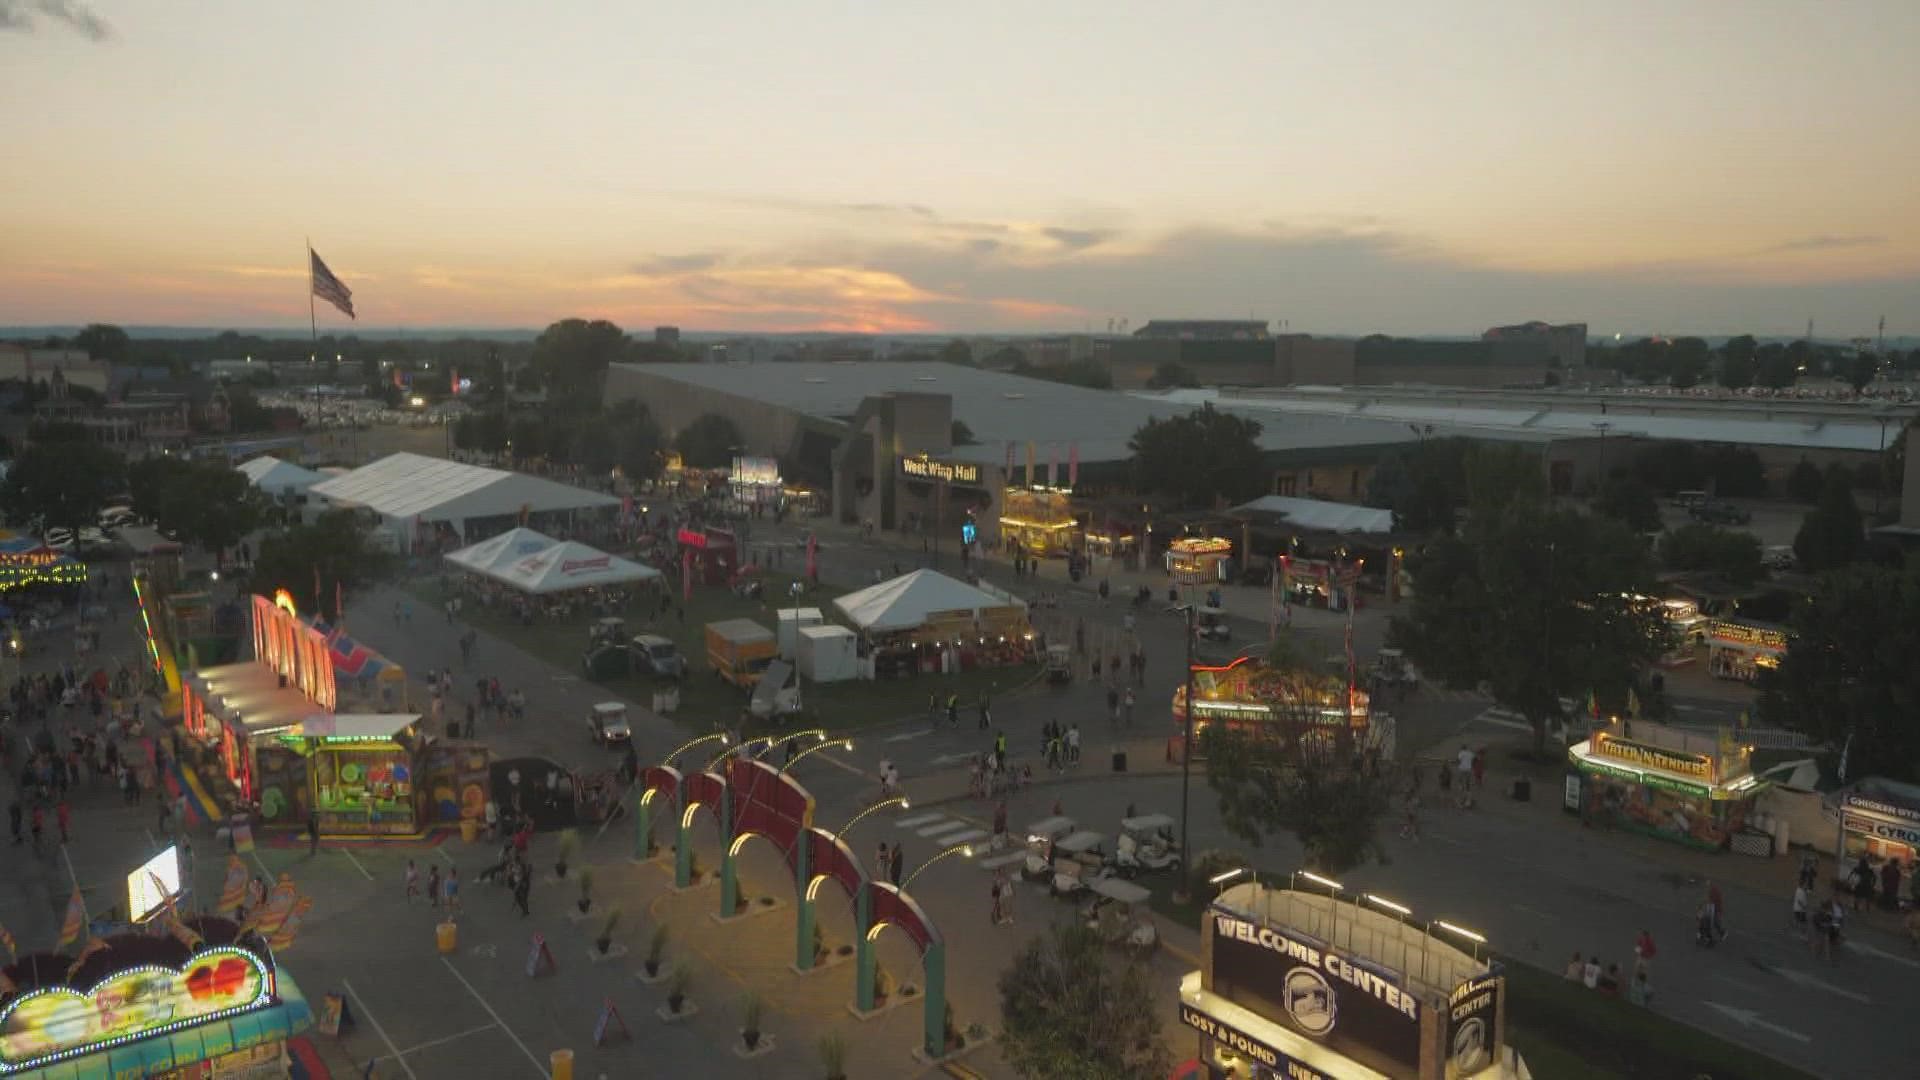 As the fair runs late into the evening, there's plenty of fun still to be had as the sun goes down.